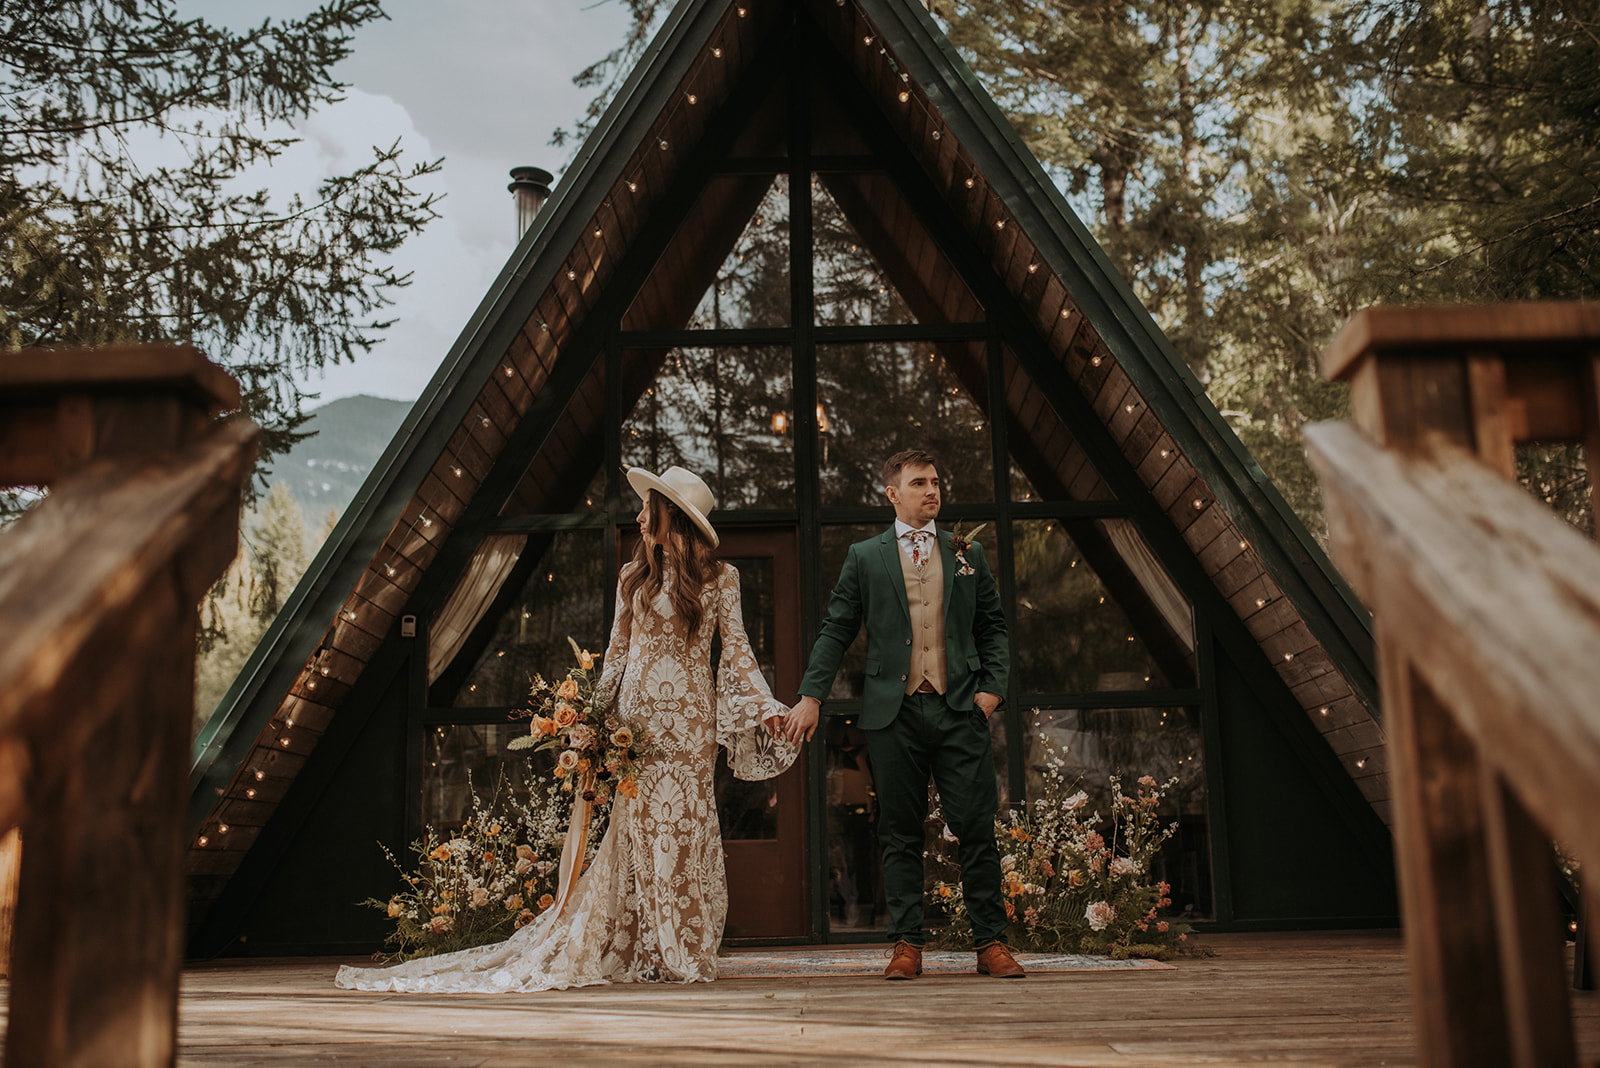 Mount Rainier elopement photographer captures intimate moment at cozy a-frame cabin, Woodsy wedding details